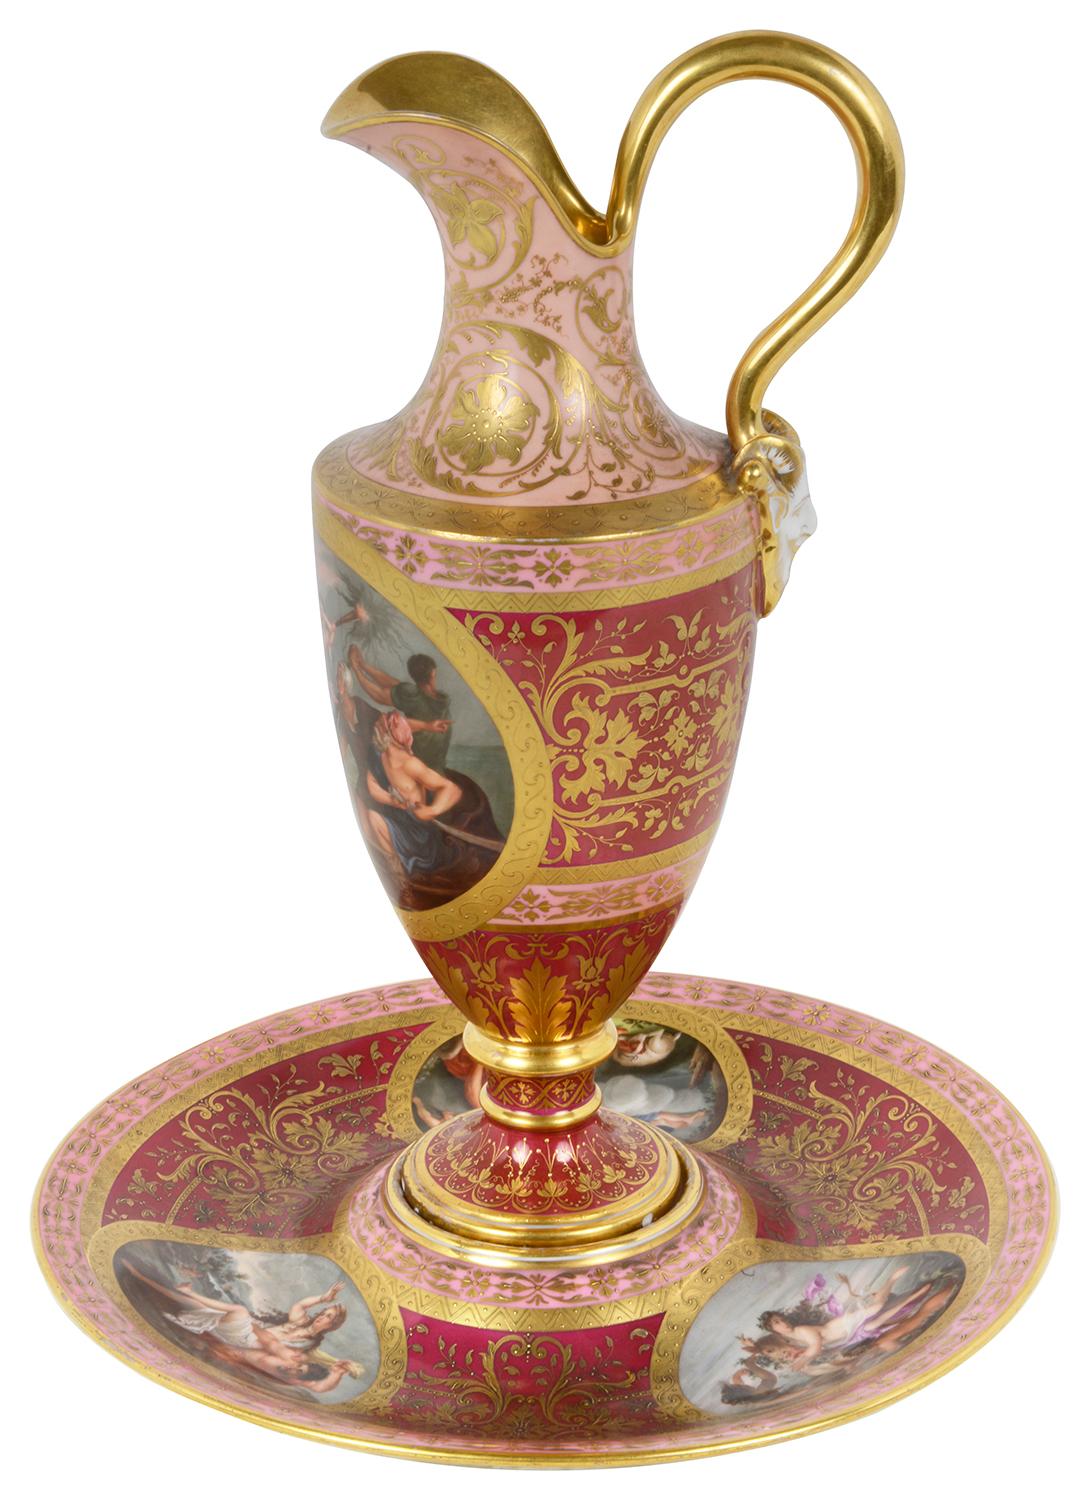 A fine quality late 19th Century Austrian, Vienna porcelain hand painted Ewer on plate having a burgundy colour ground boarder with scrolling gilded decoration, inset painted panels depicting Classical Greek scenes.